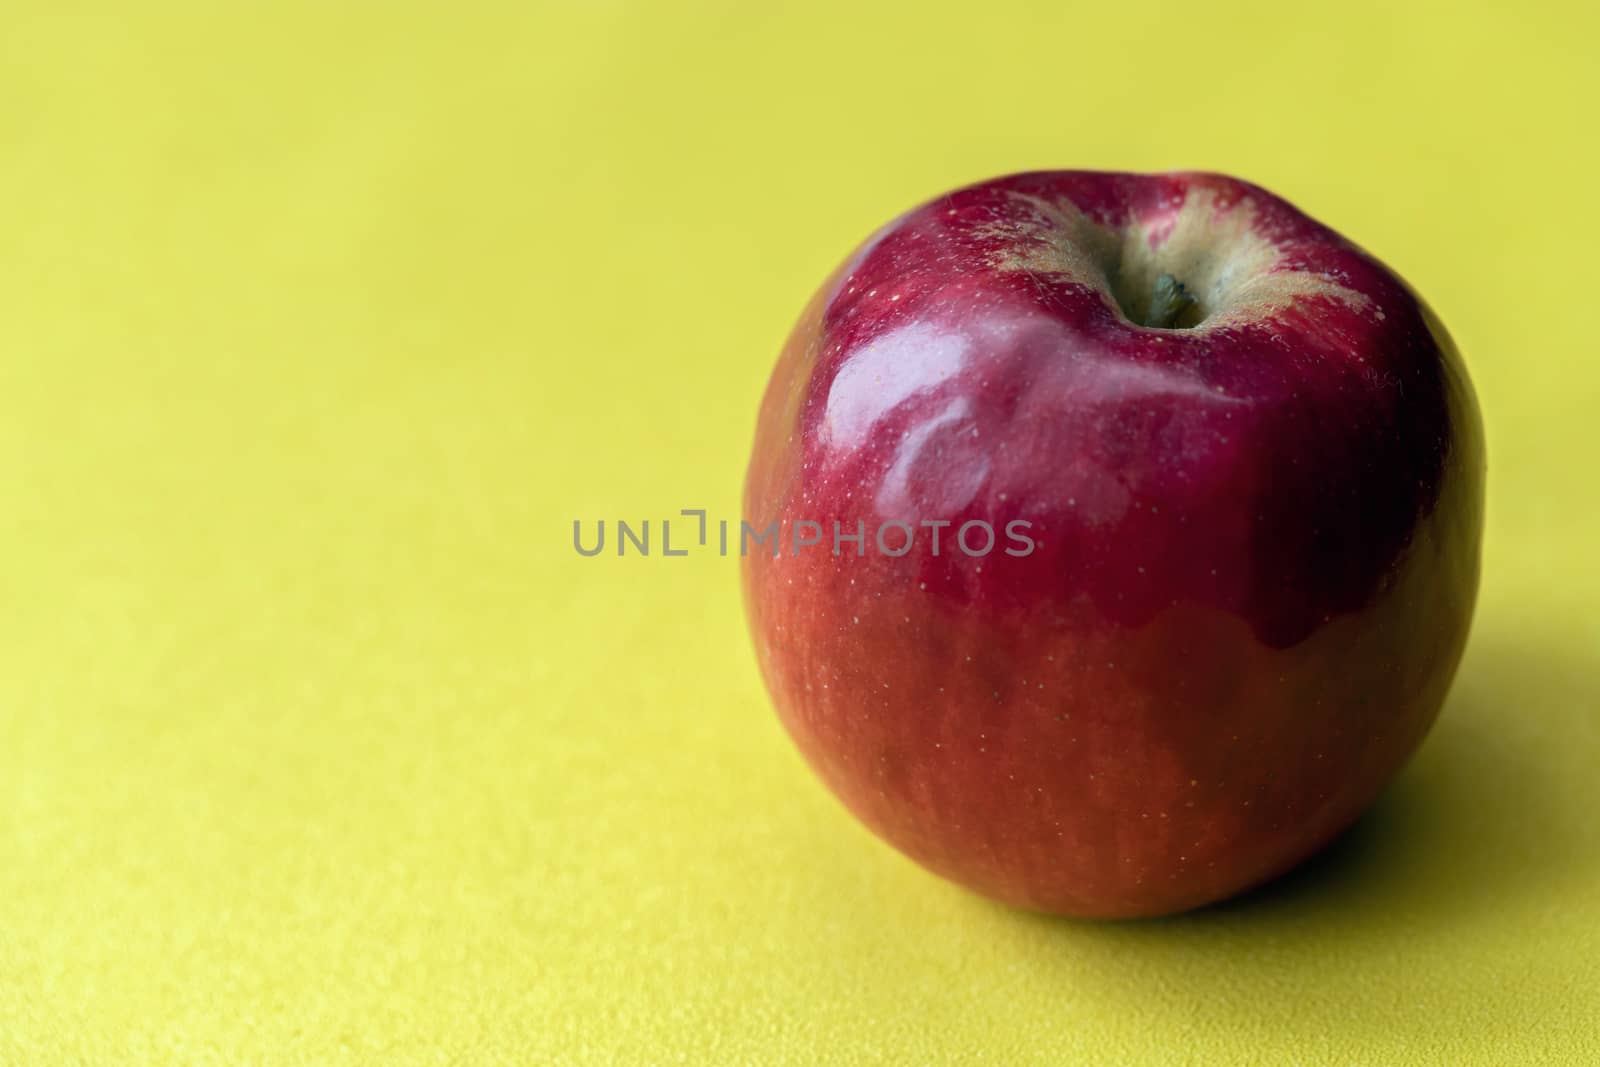 Red fresh Apple on a yellow background, isolate by bonilook